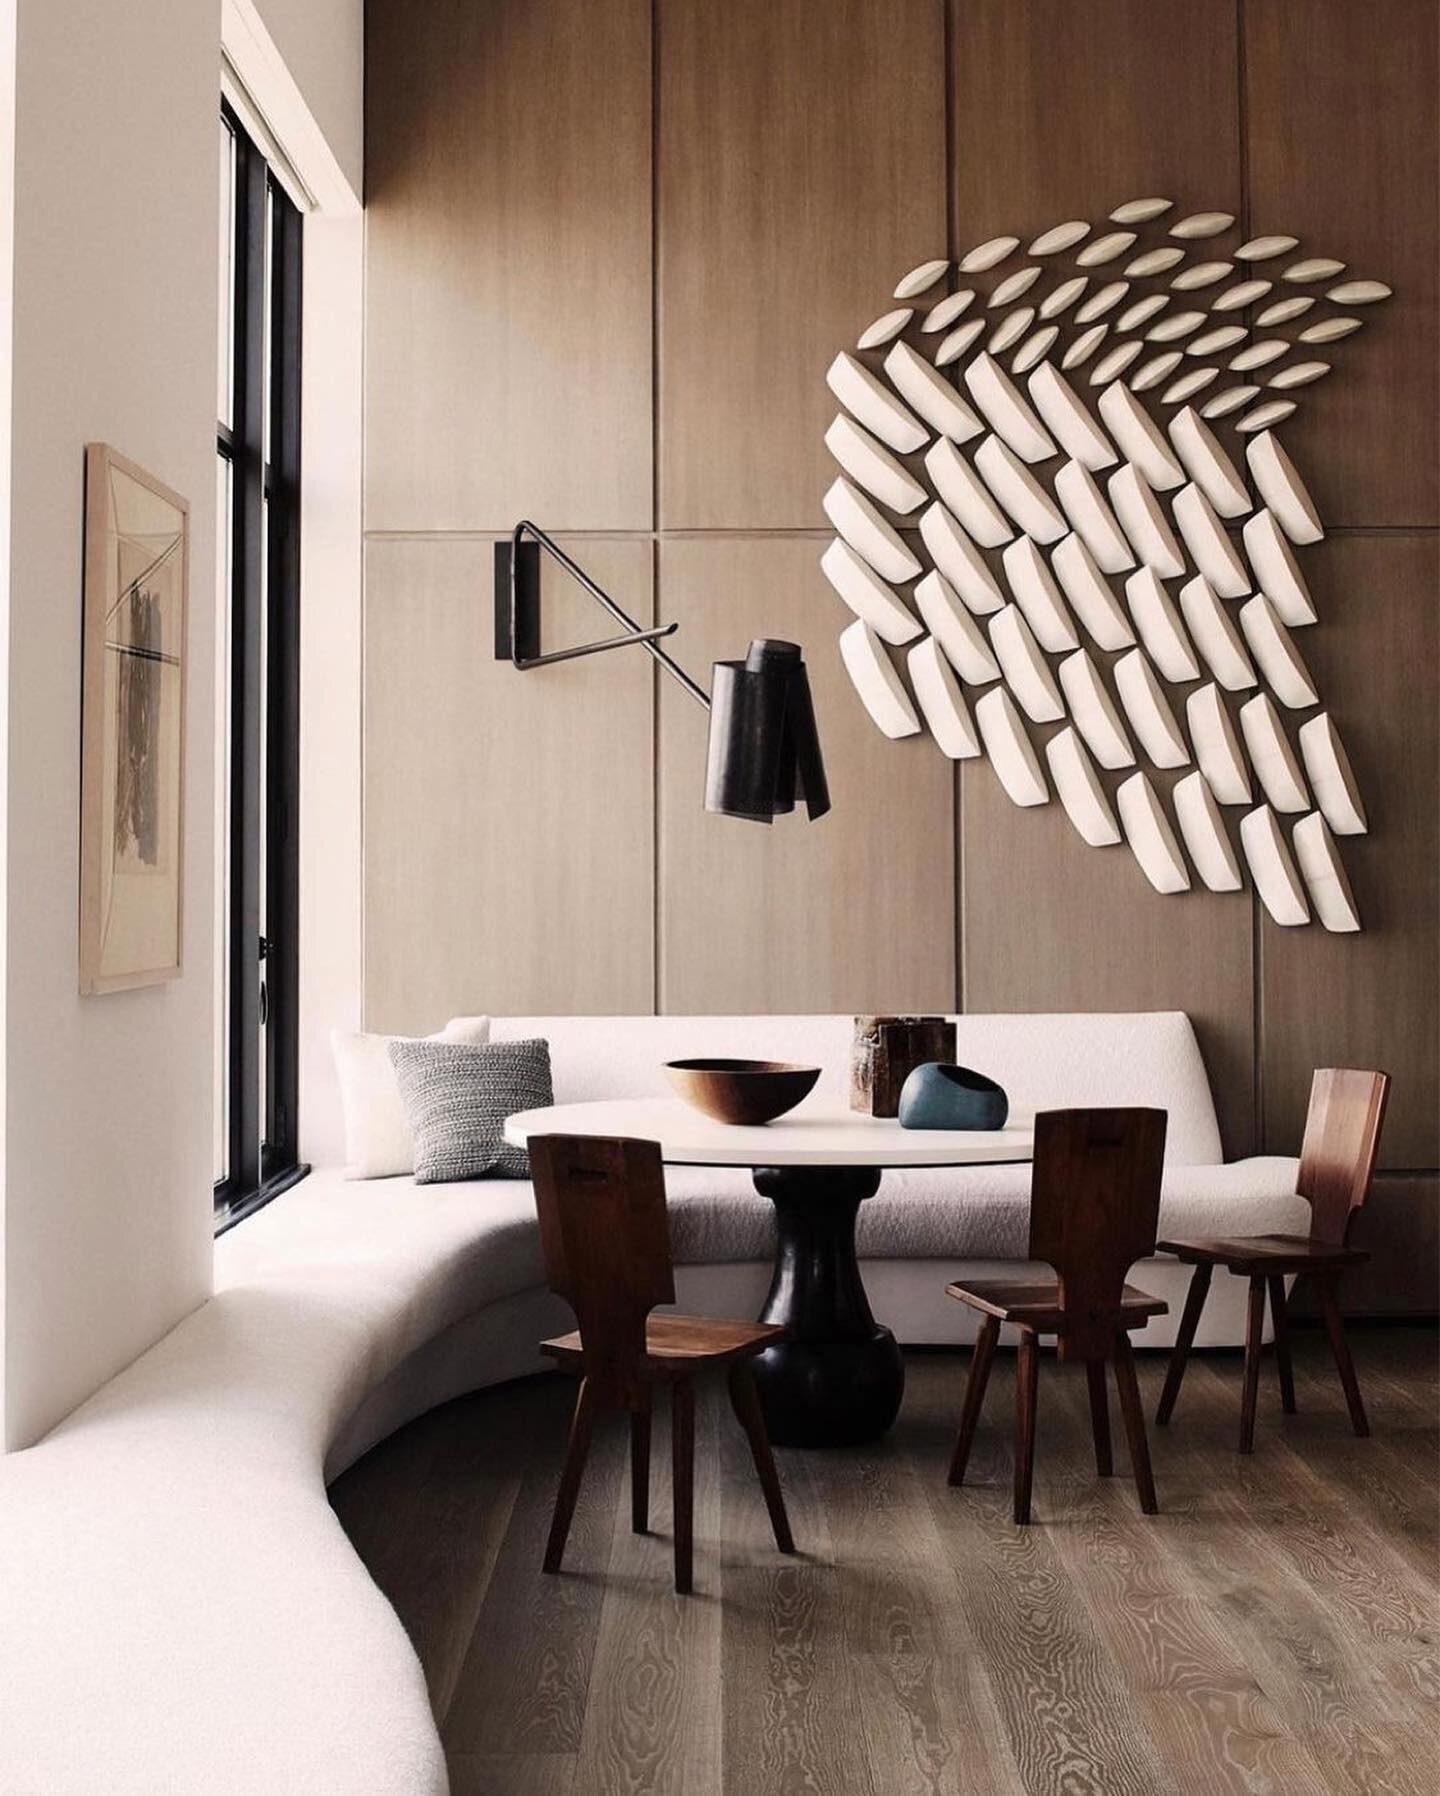 Majorly inspired by this room! 👏🏼👏🏼👏🏼

The organic lines of that banquette? The texture?  The palette!? Whew! 

Repost from @immoniquegibson
&bull;
I love when clients I love meet architects I love @ikekligermanbarkley and then they all meet a 